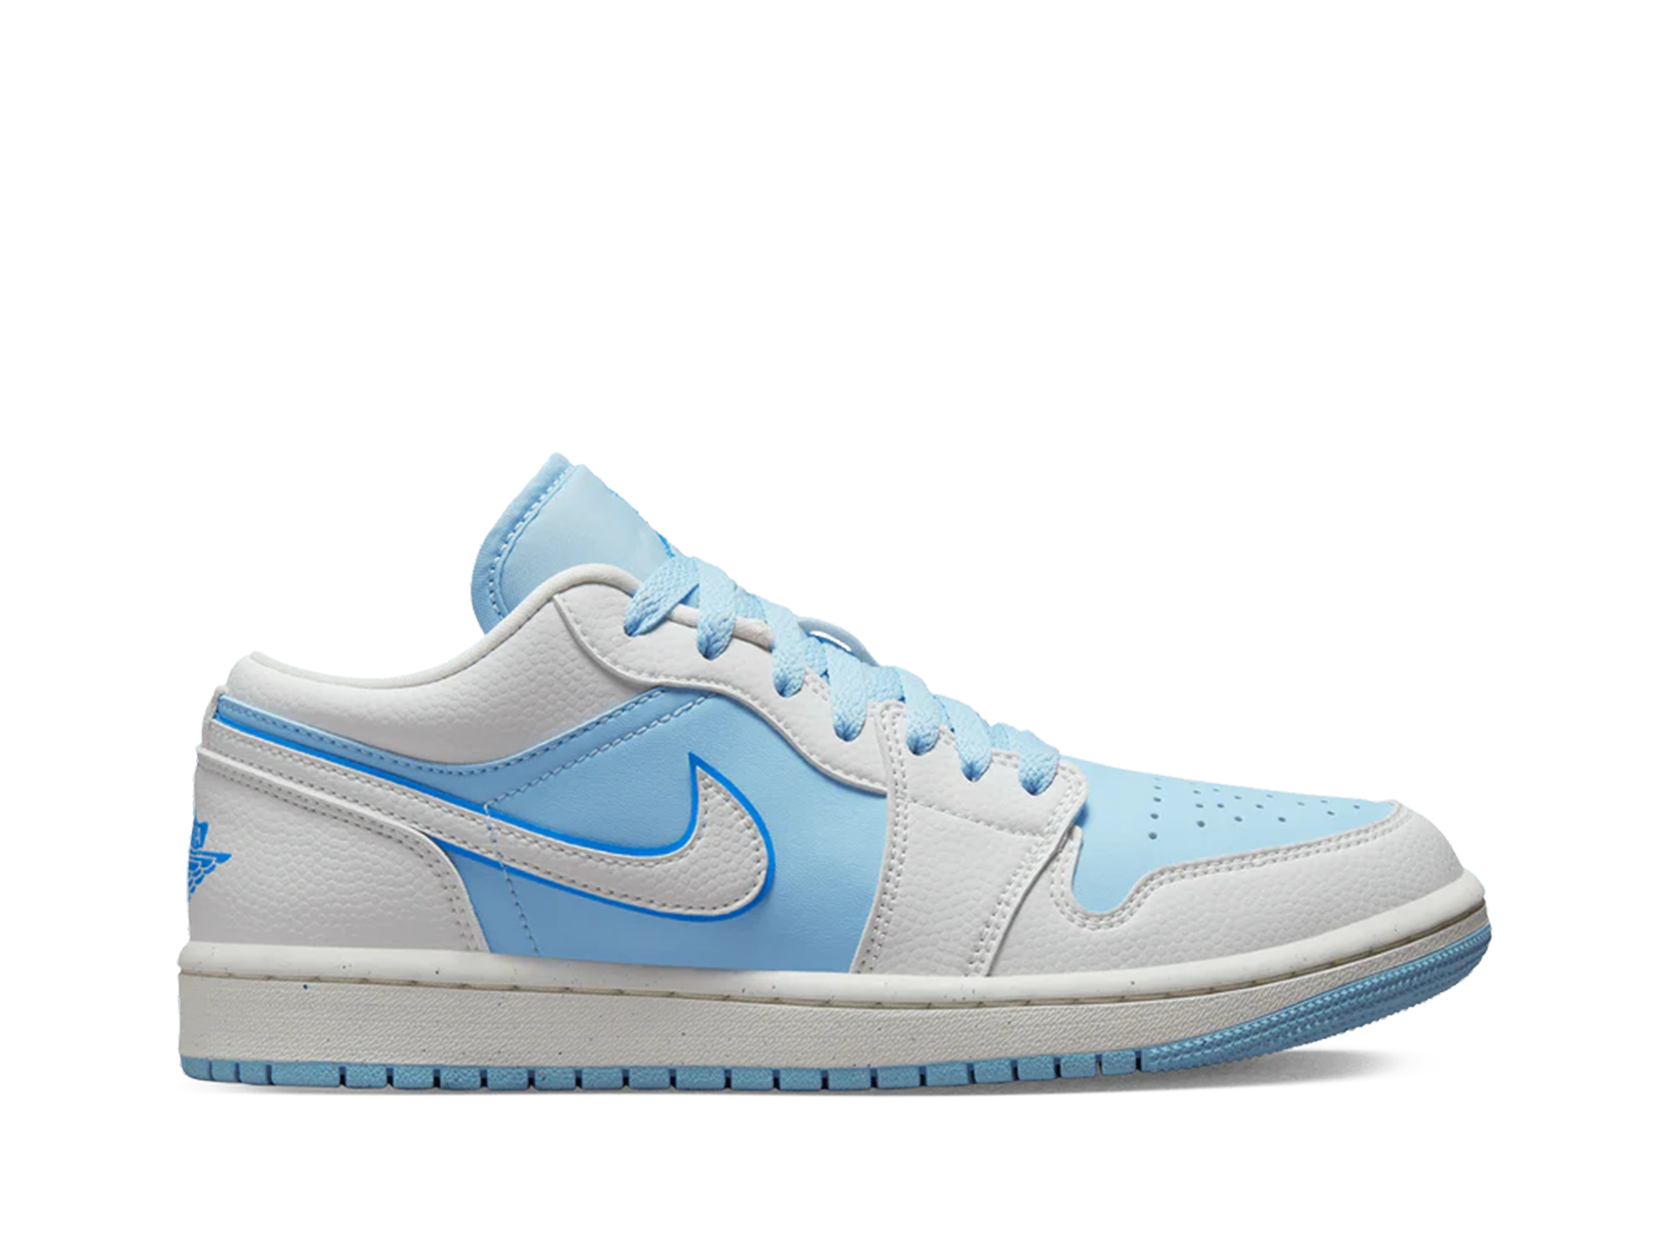 Double Boxed  199.99 Nike Air Jordan 1 Low Reverse Ice Blue (W) Double Boxed